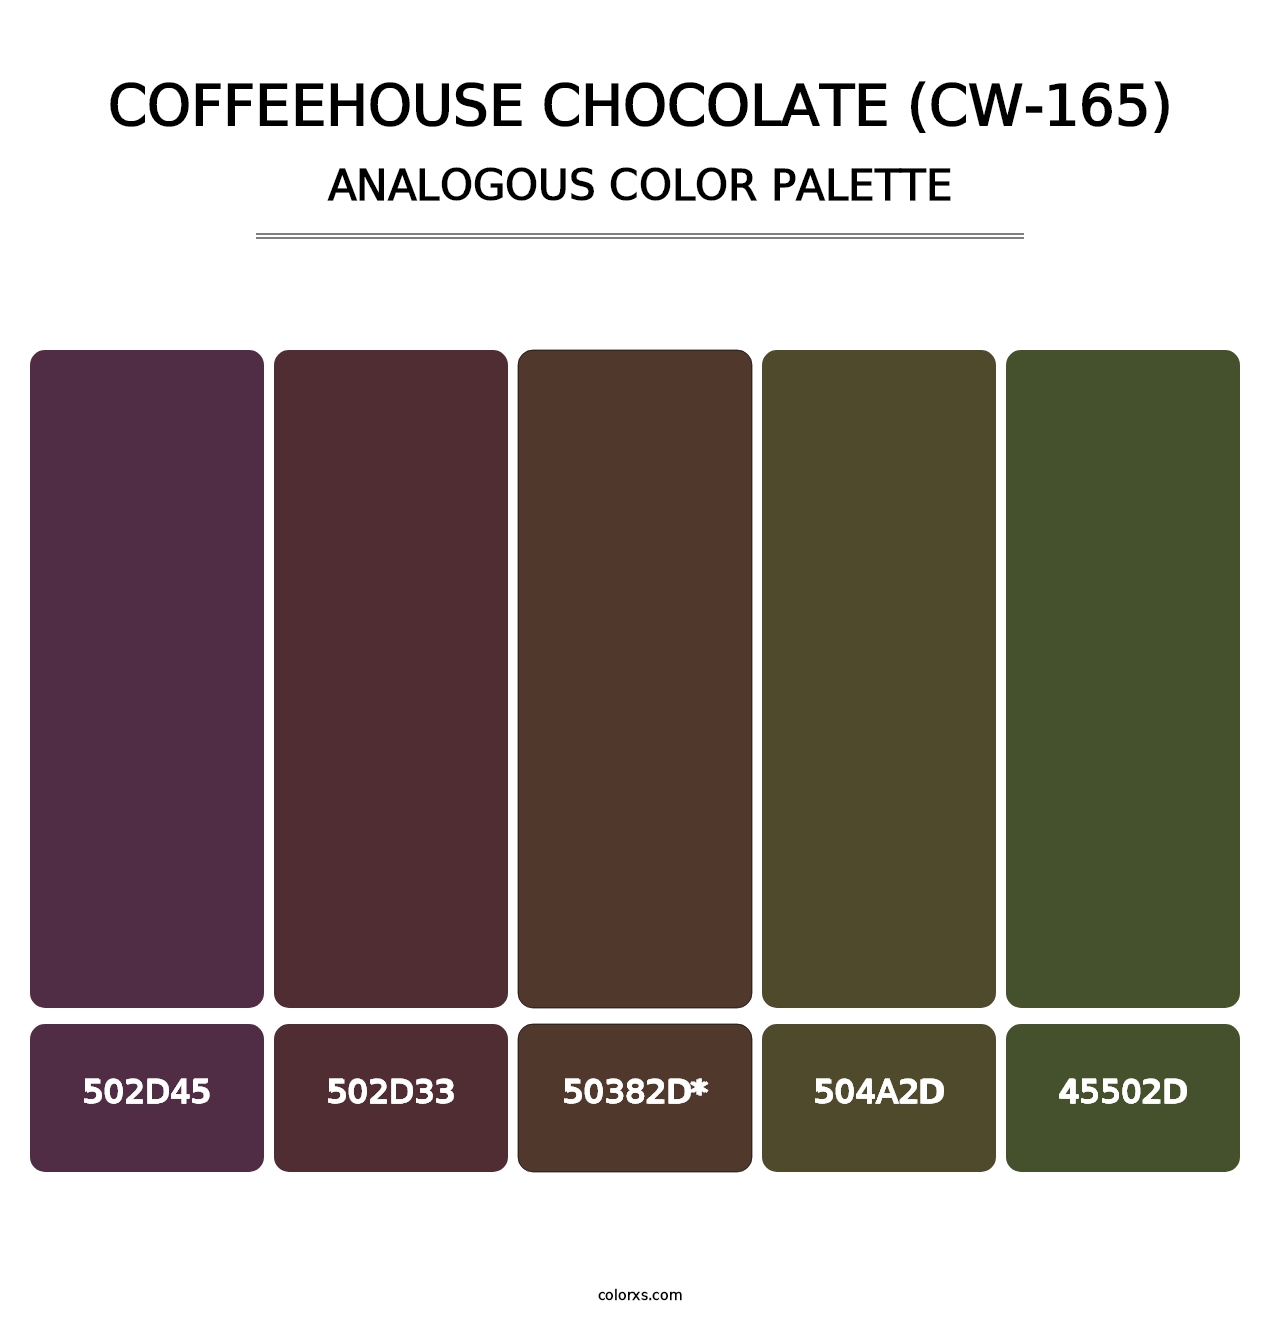 Coffeehouse Chocolate (CW-165) - Analogous Color Palette